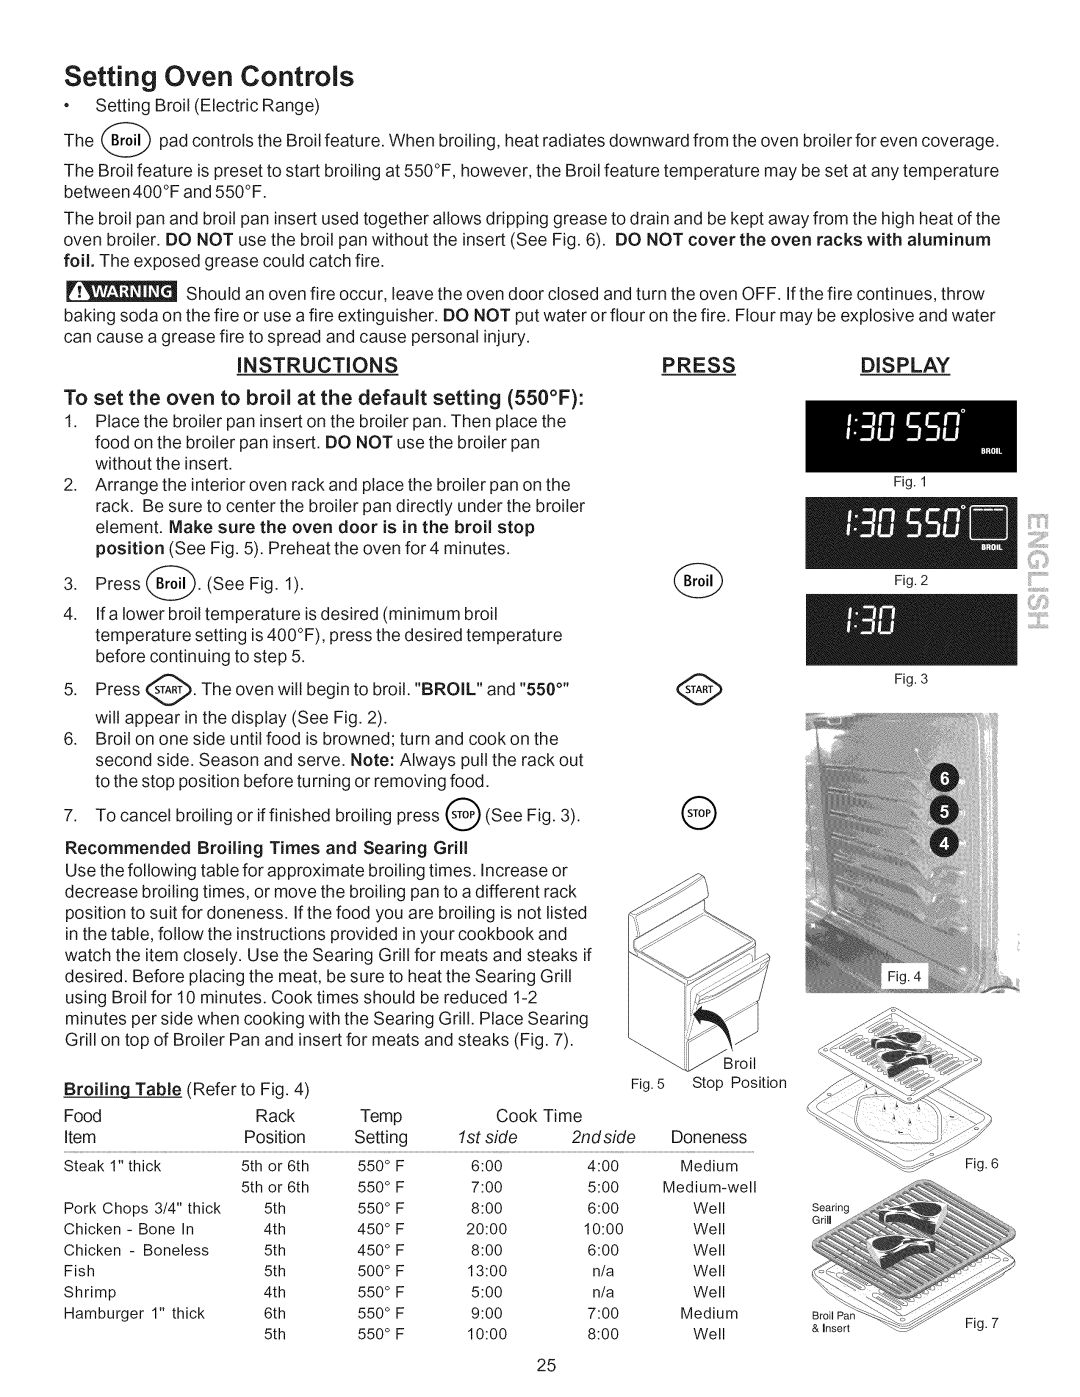 Kenmore 790.9662 Setting Oven Controls, Instructionspress, Display, Recommended Broiling Times and Searing Grill, Table 